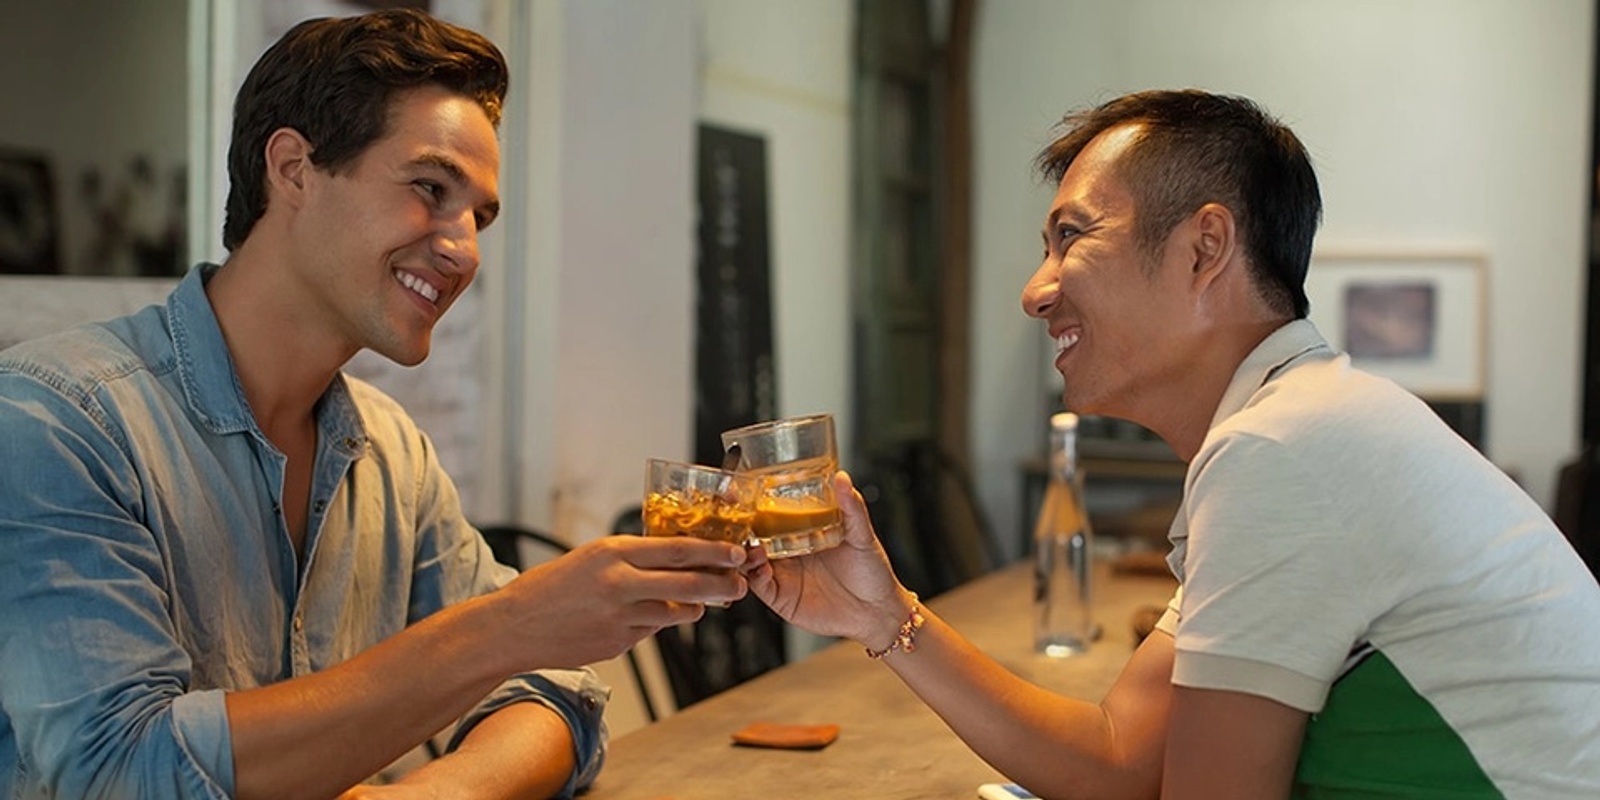 TGIF Gay Men Speed Dating 2.0 in Windsor! Ages 35-55